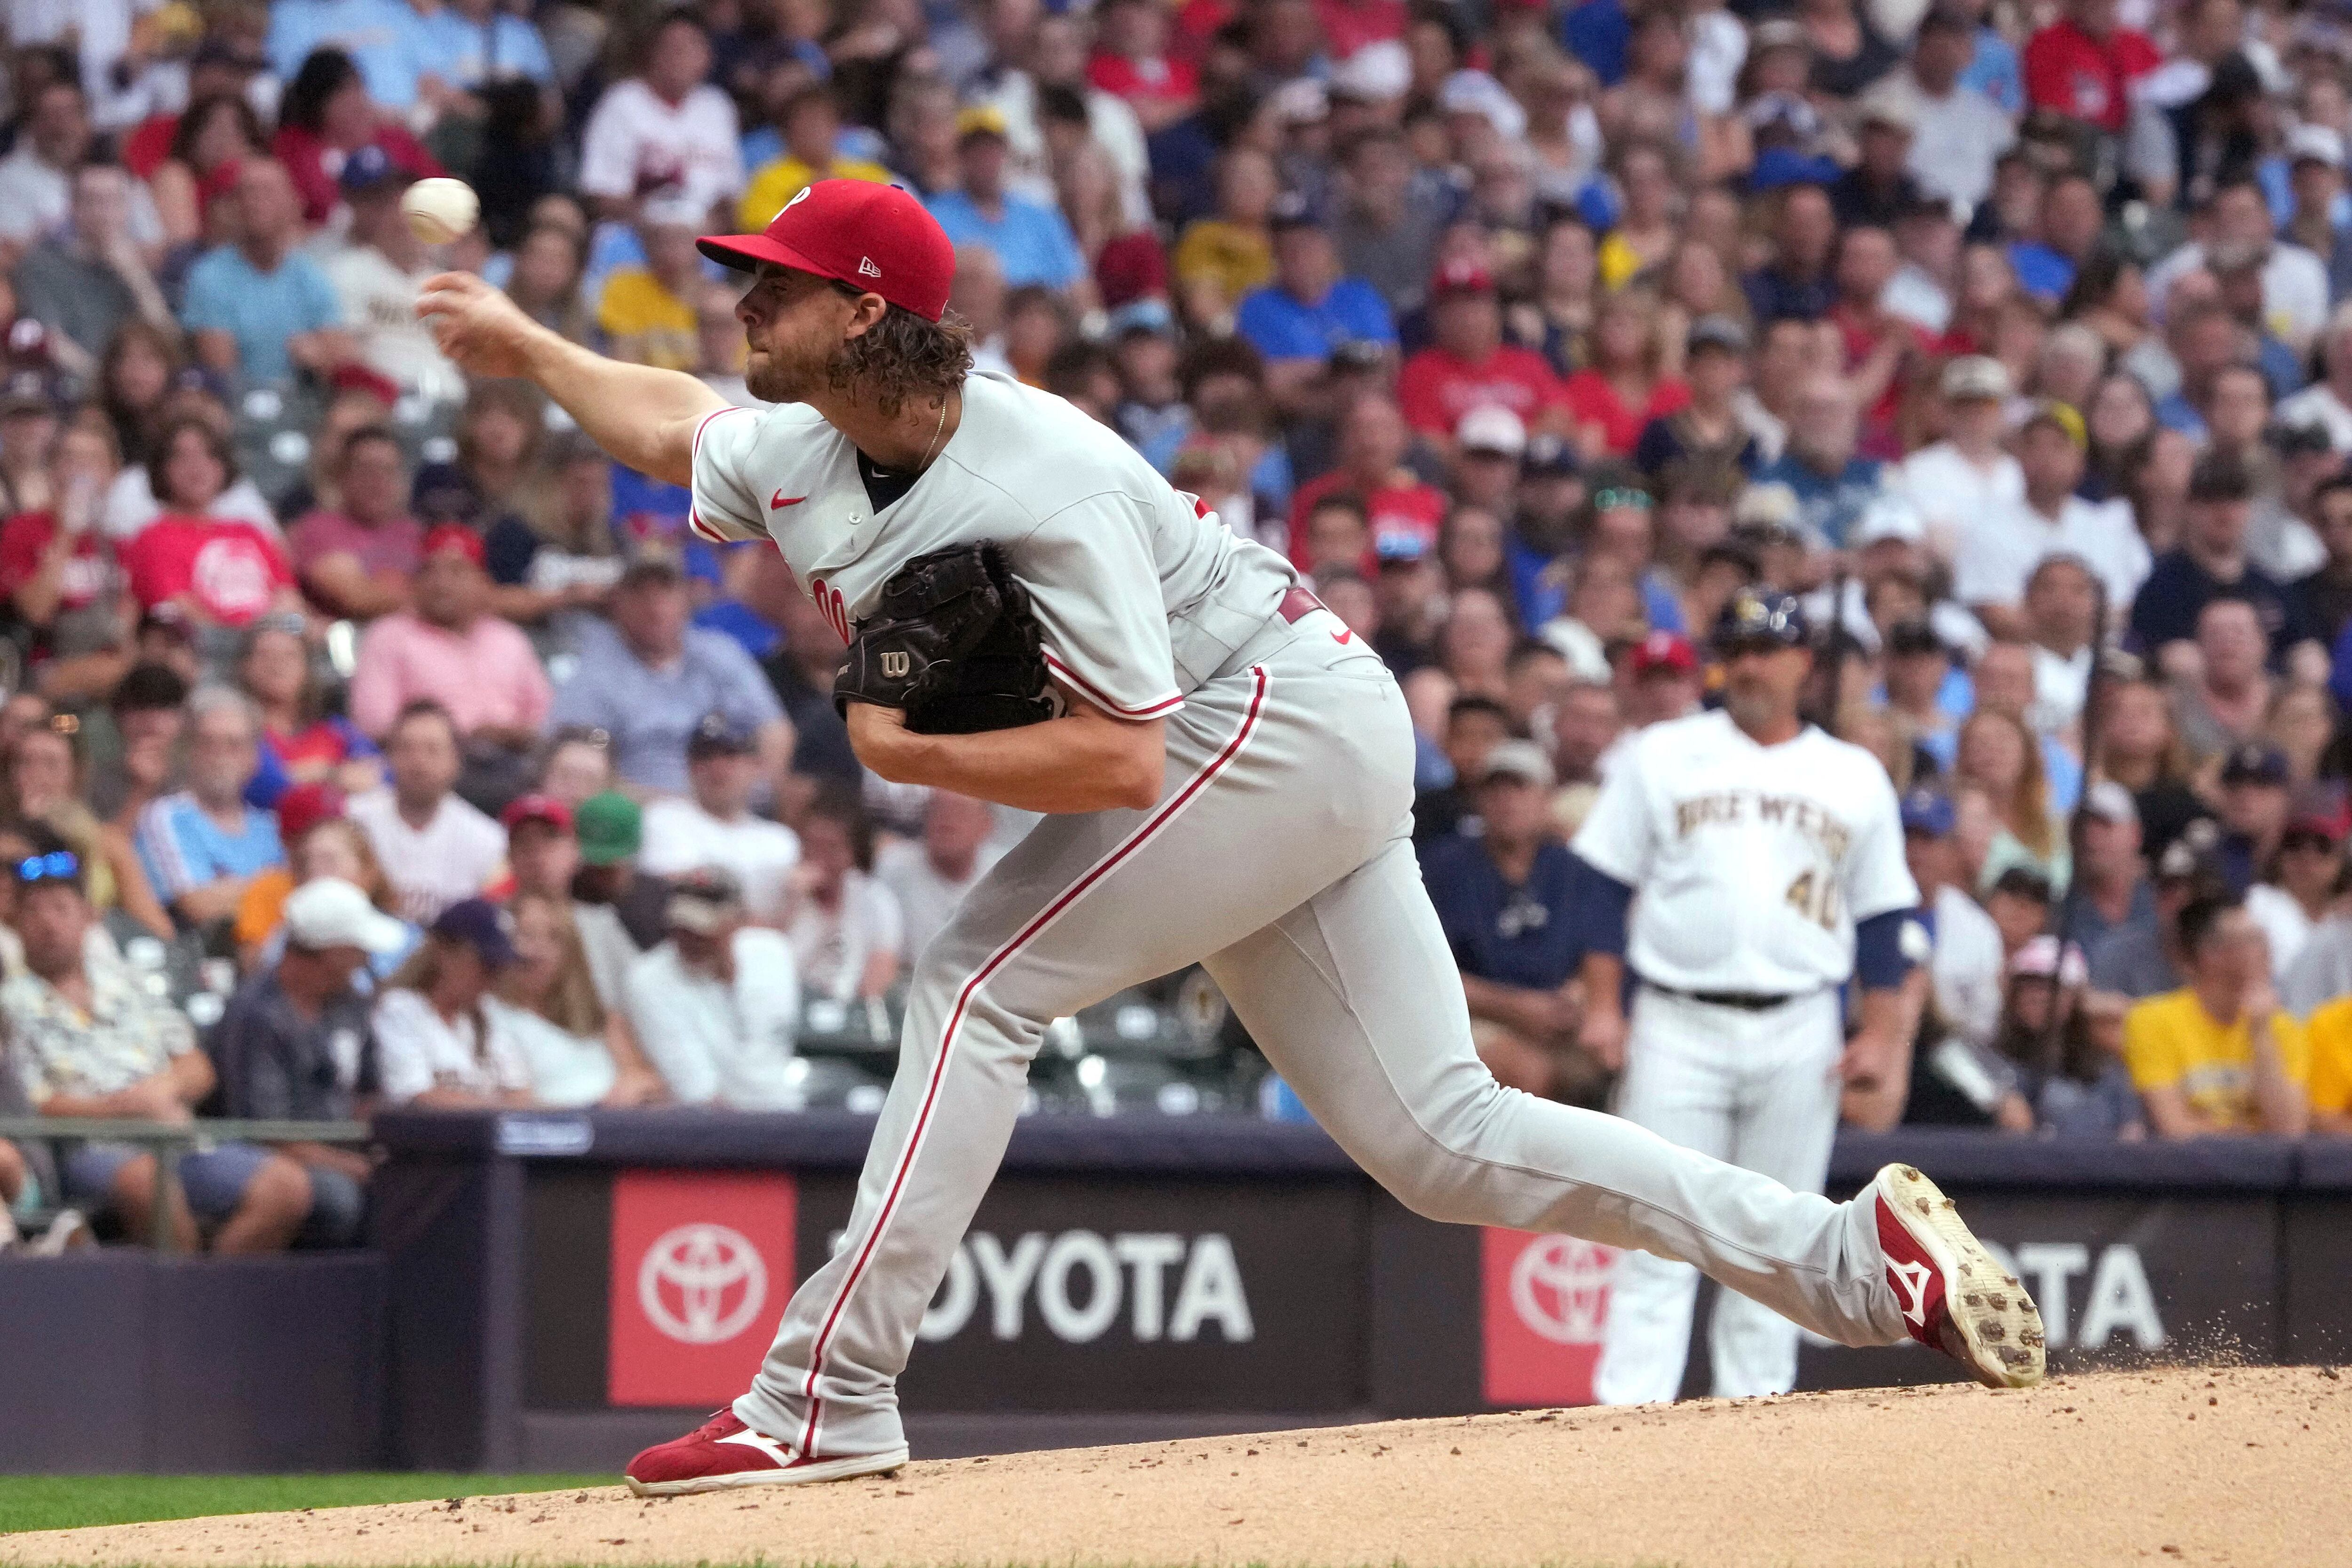 Nola shines in 1st start after All-Star break as Phillies edge Brewers